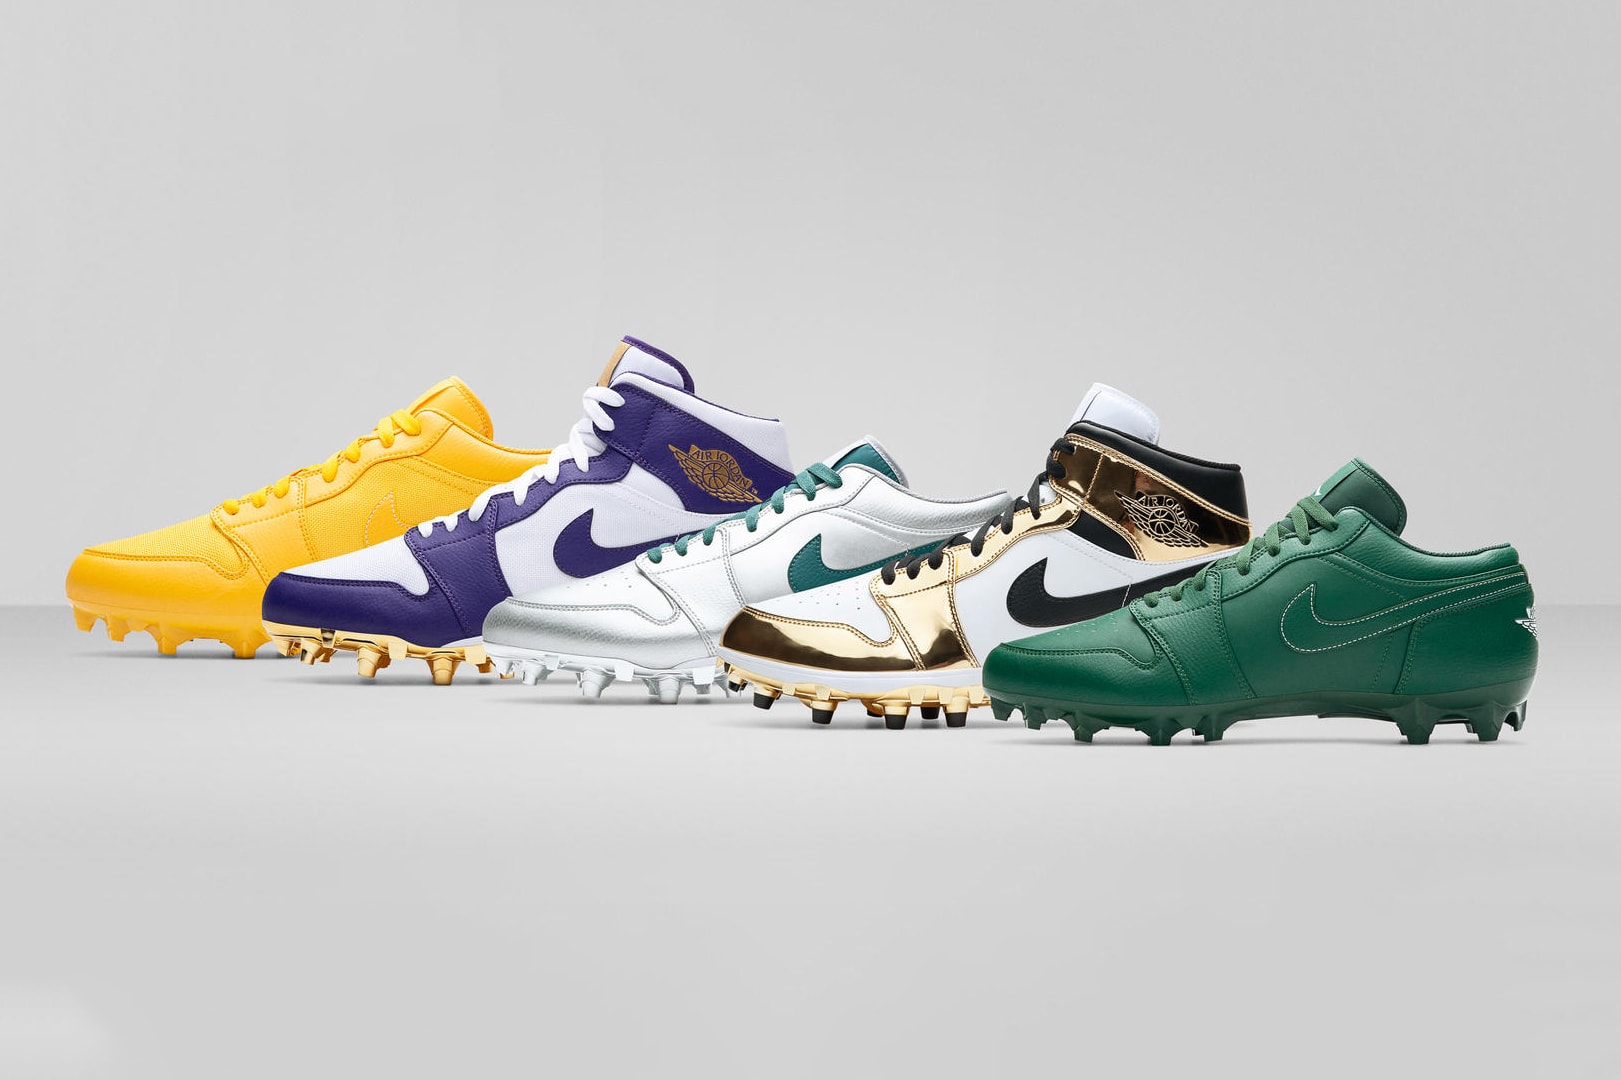 Jordan Brand Reveals Air Jordan 1 PEs for the NFL football nike boots cleats Tyrann Mathieu of the Kansas City Chiefs, Earl Thomas of the Baltimore Ravens, Alshon Jeffery of the Philadelphia Eagles, Michael Thomas of the New Orleans Saints, and Le’Veon Bell of the New York Jets